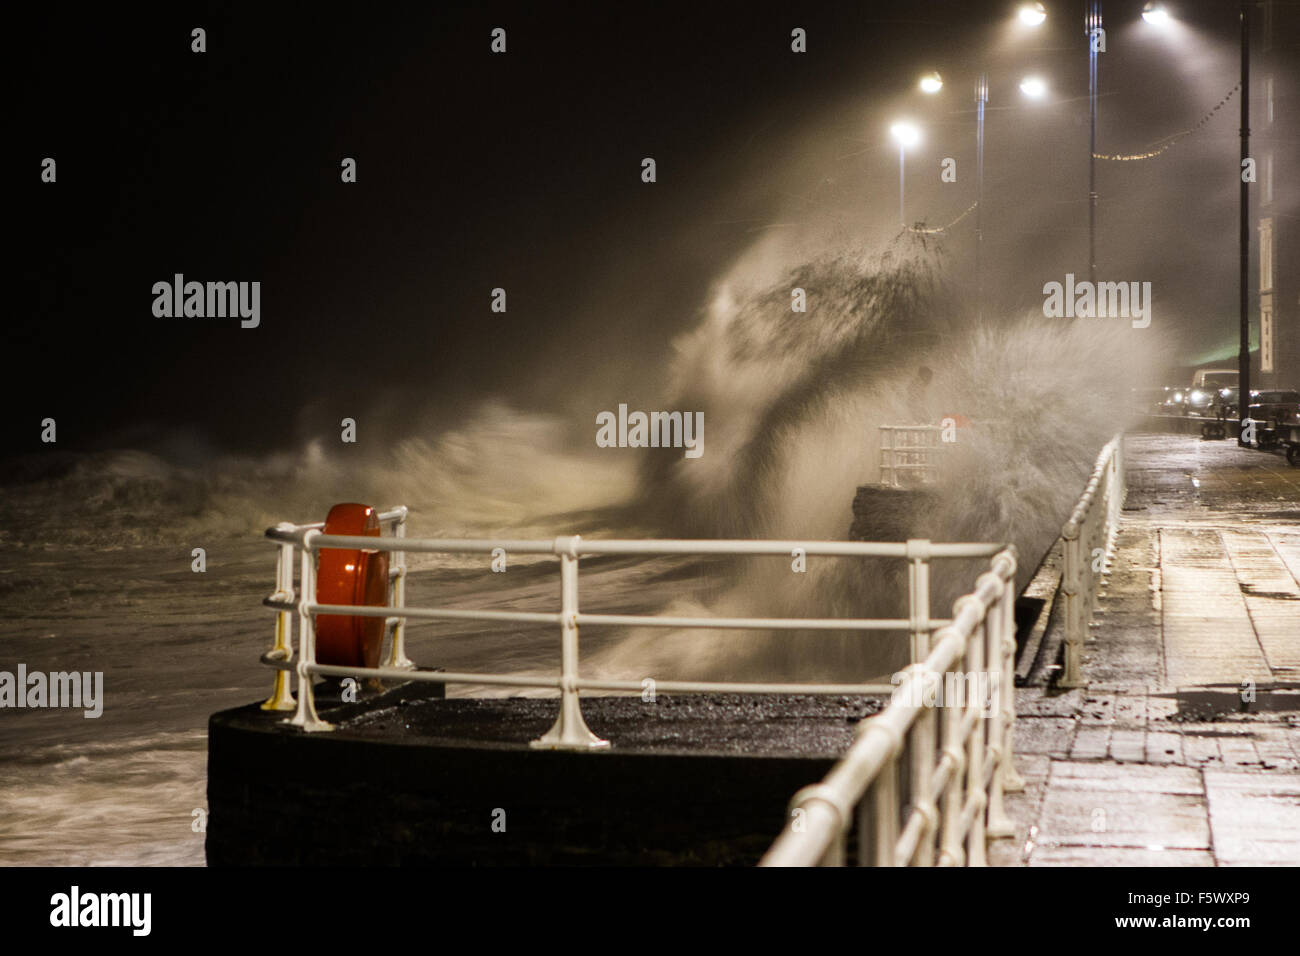 Big waves battering Aberystwyth promenade as man holds onto railings waiting to get submerged by the next wave Aberystwyth Stock Photo